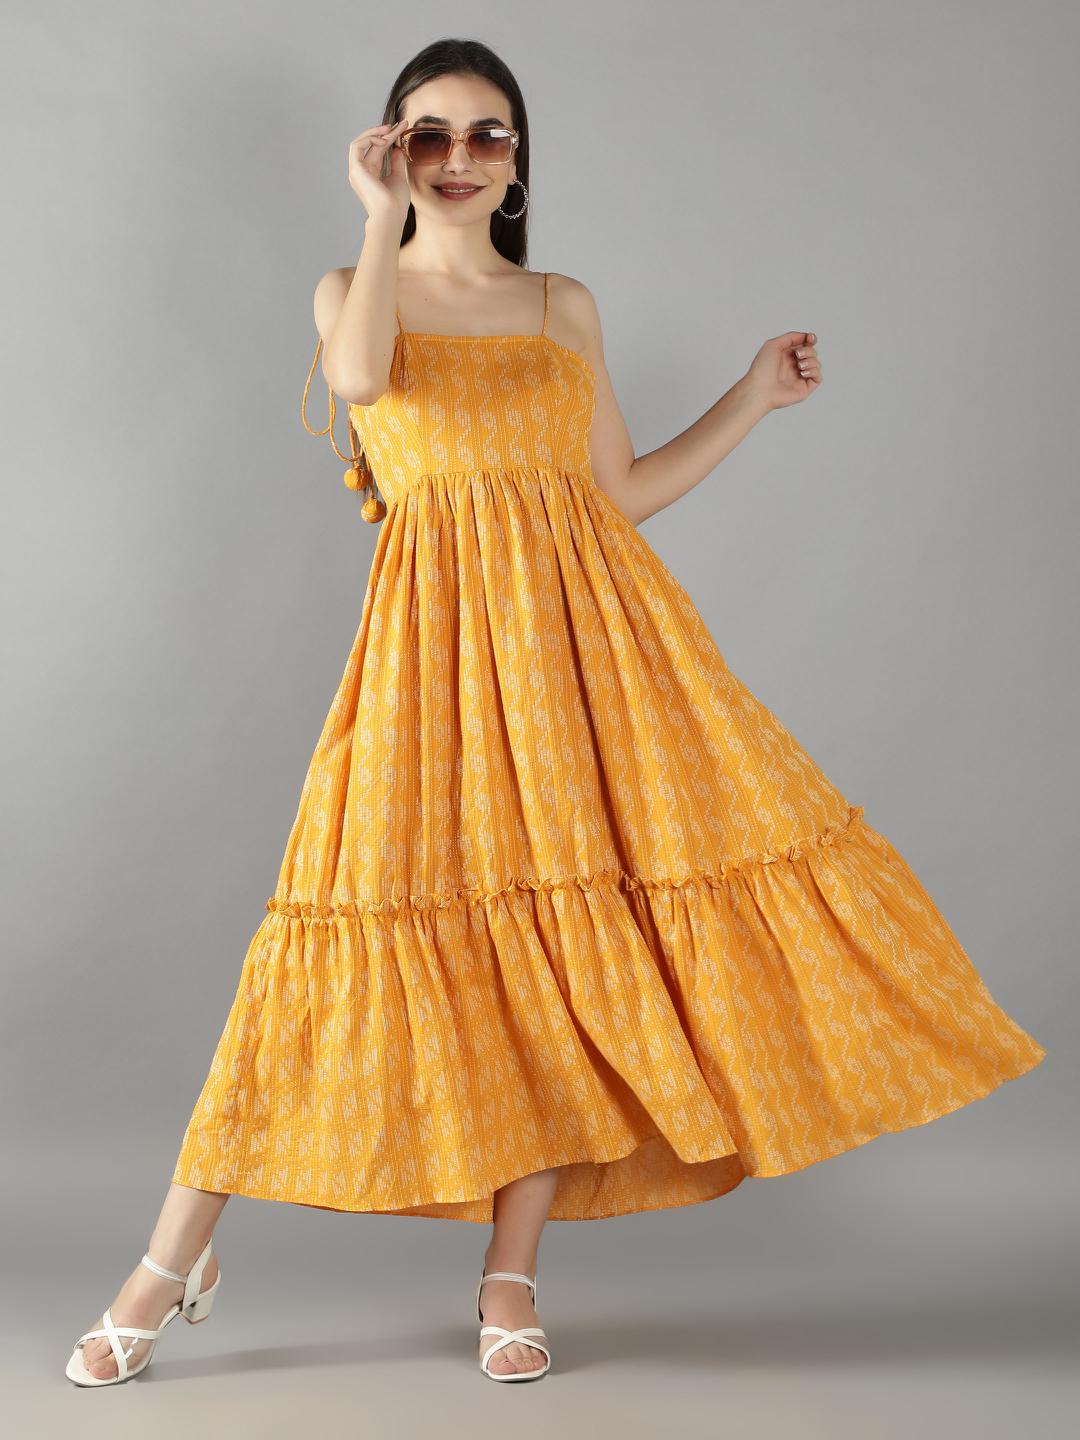 signal-yellow-shoulder-tie-up-flared-dress-11704112YL, Women Clothing, Cotton Dress